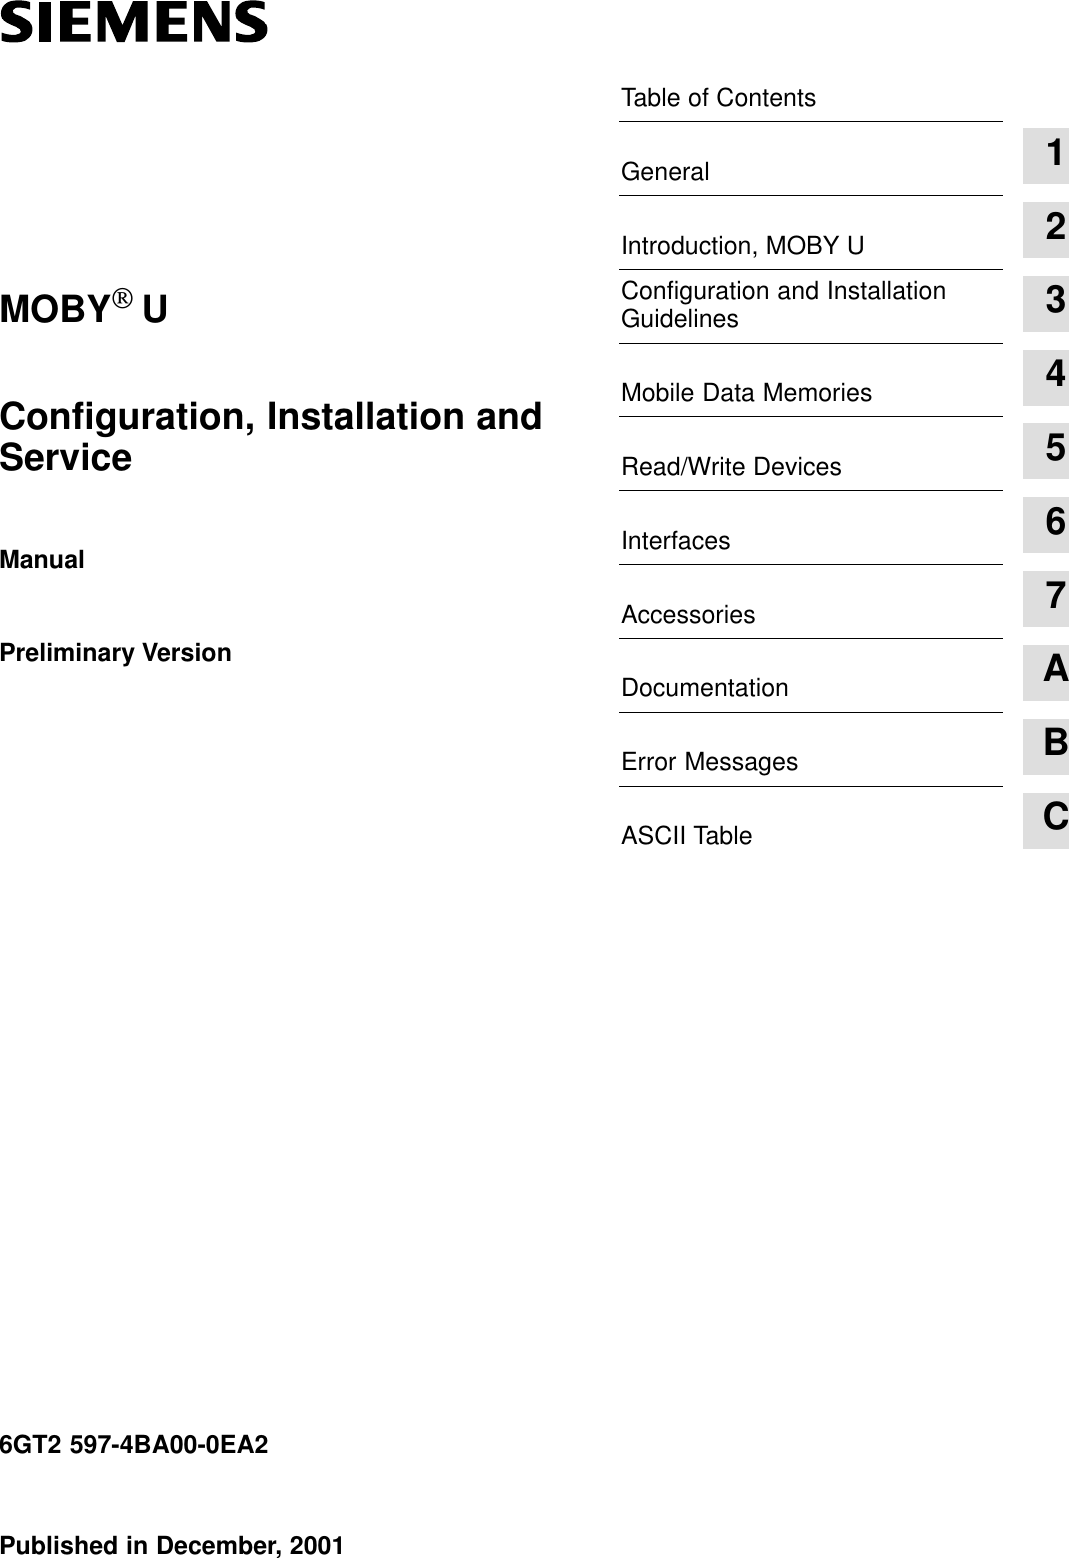 Table of ContentsGeneral 1Introduction, MOBY U 2Configuration and InstallationGuidelines 3Mobile Data Memories 4Read/Write Devices 5Interfaces 6Accessories 7Documentation AError Messages BASCII Table CPublished in December, 20016GT2 597-4BA00-0EA2Configuration, Installation andServiceManualPreliminary VersionMOBYU